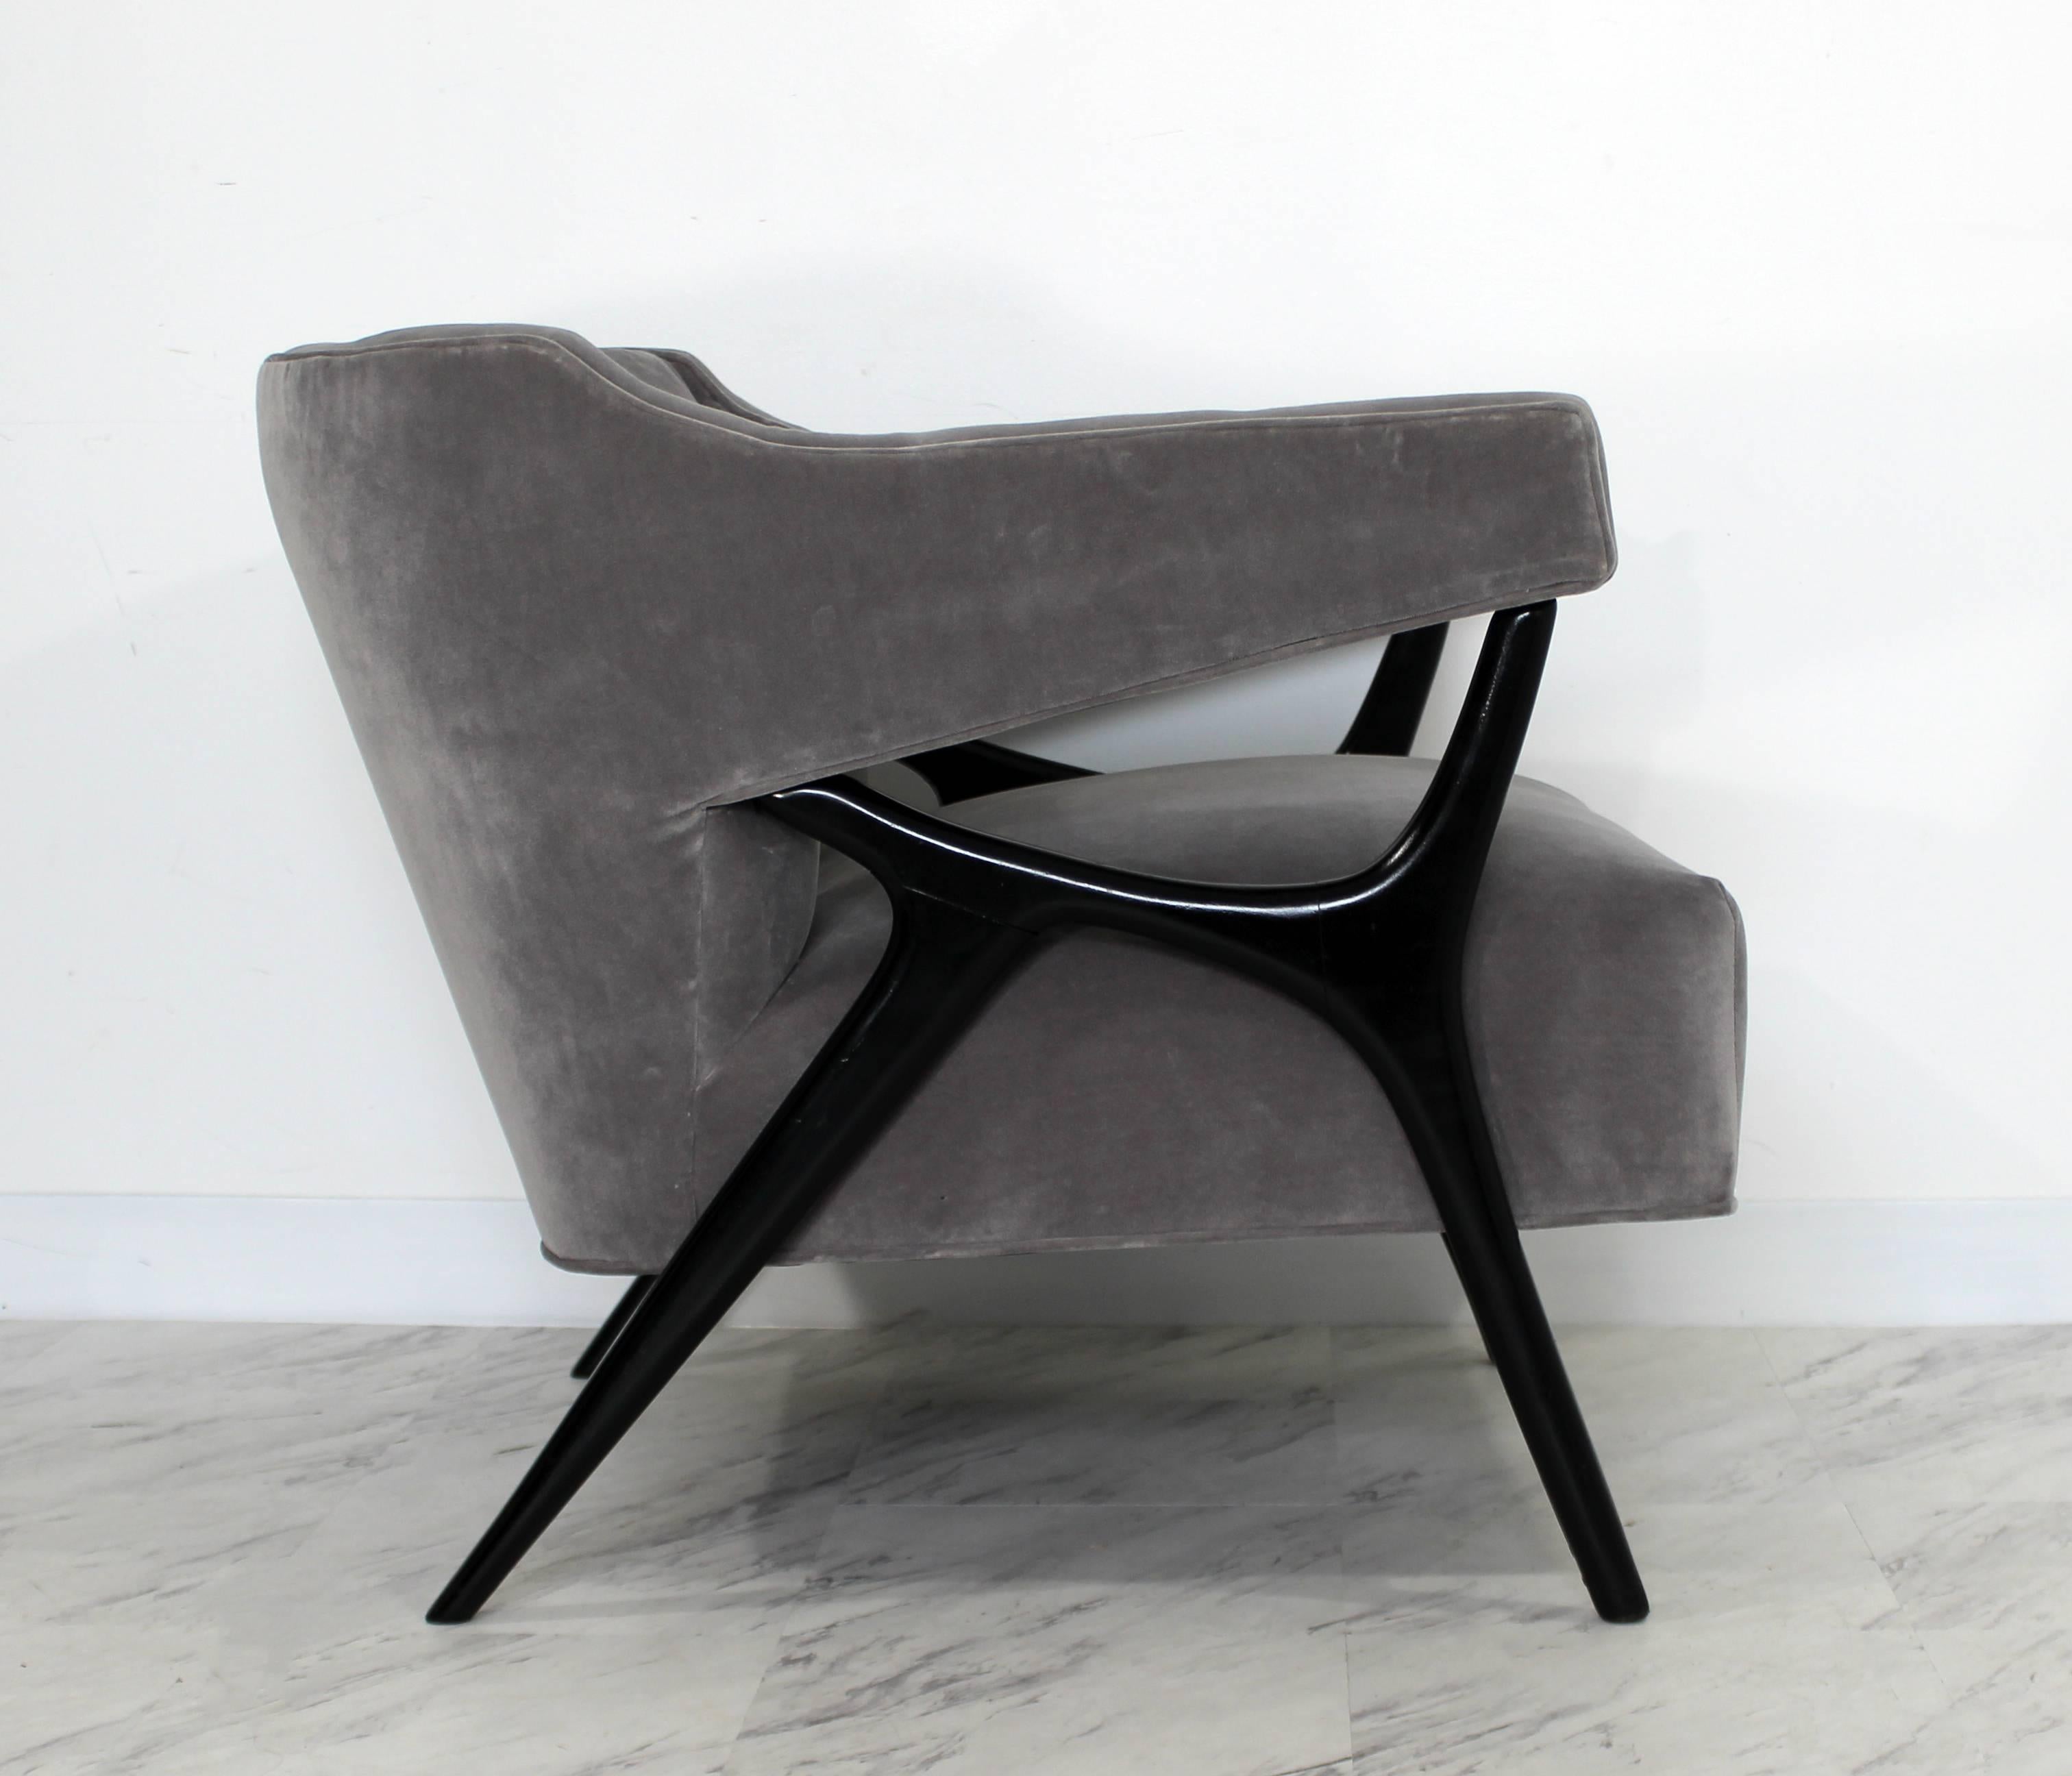 For your consideration is an amazing sculptural Italian lounge chair, black ebonized wood frame. Chair was just professionally reupholstered in grey velvet fabric. In excellent condition. The dimensions are 30